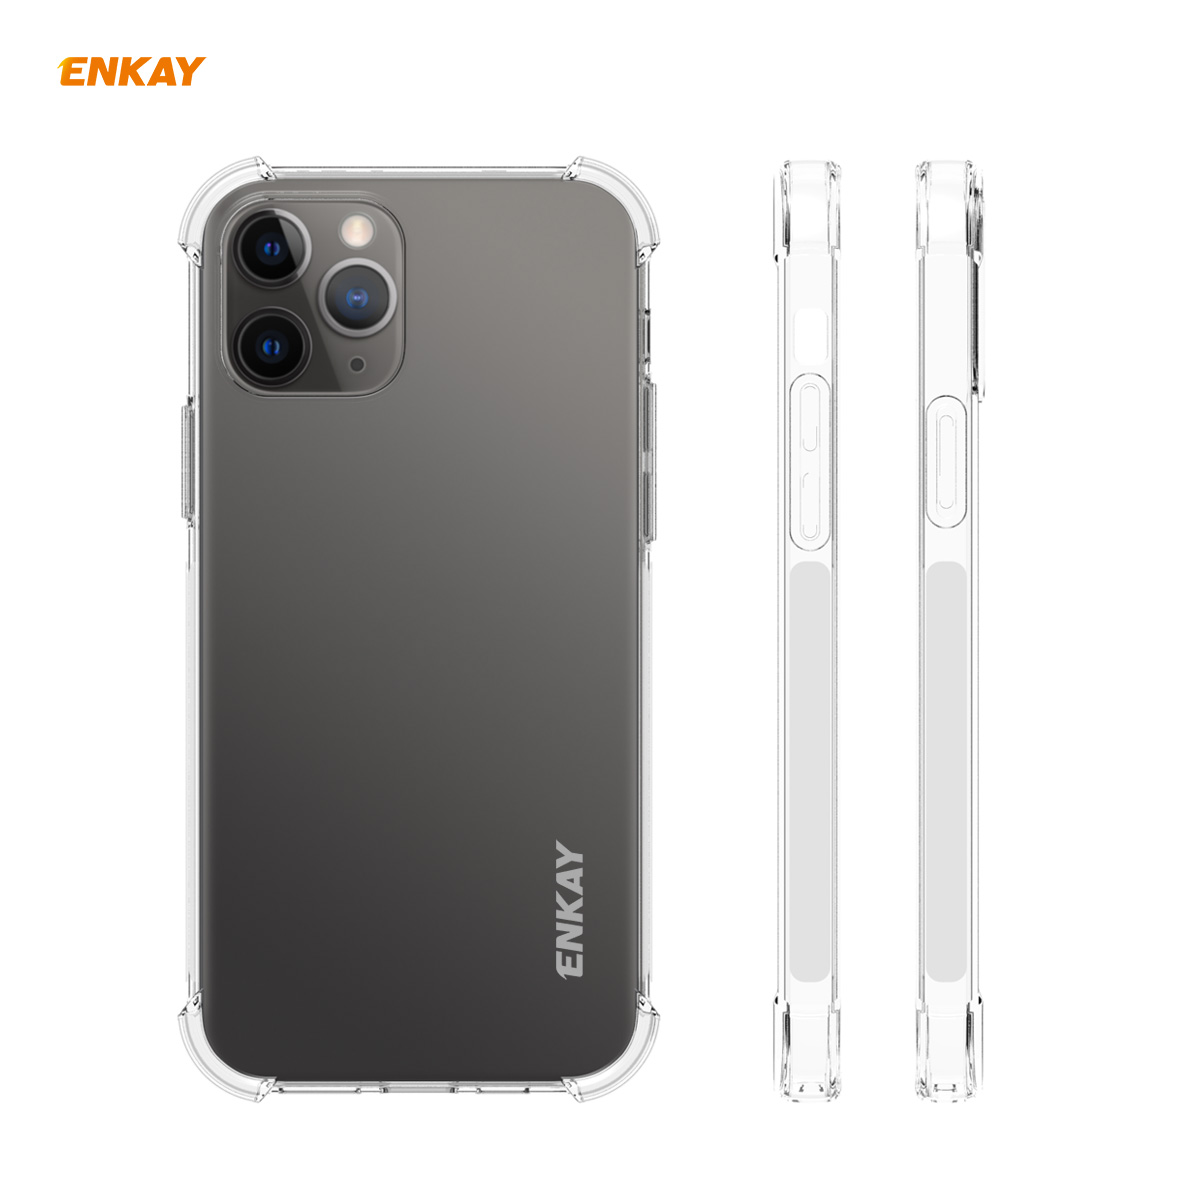 Enkay-2-in-1-for-iPhone-12-Pro-Max-Accessories-with-Airbags-Non-Yellow-Transparent-TPU-Protective-Ca-1769387-9